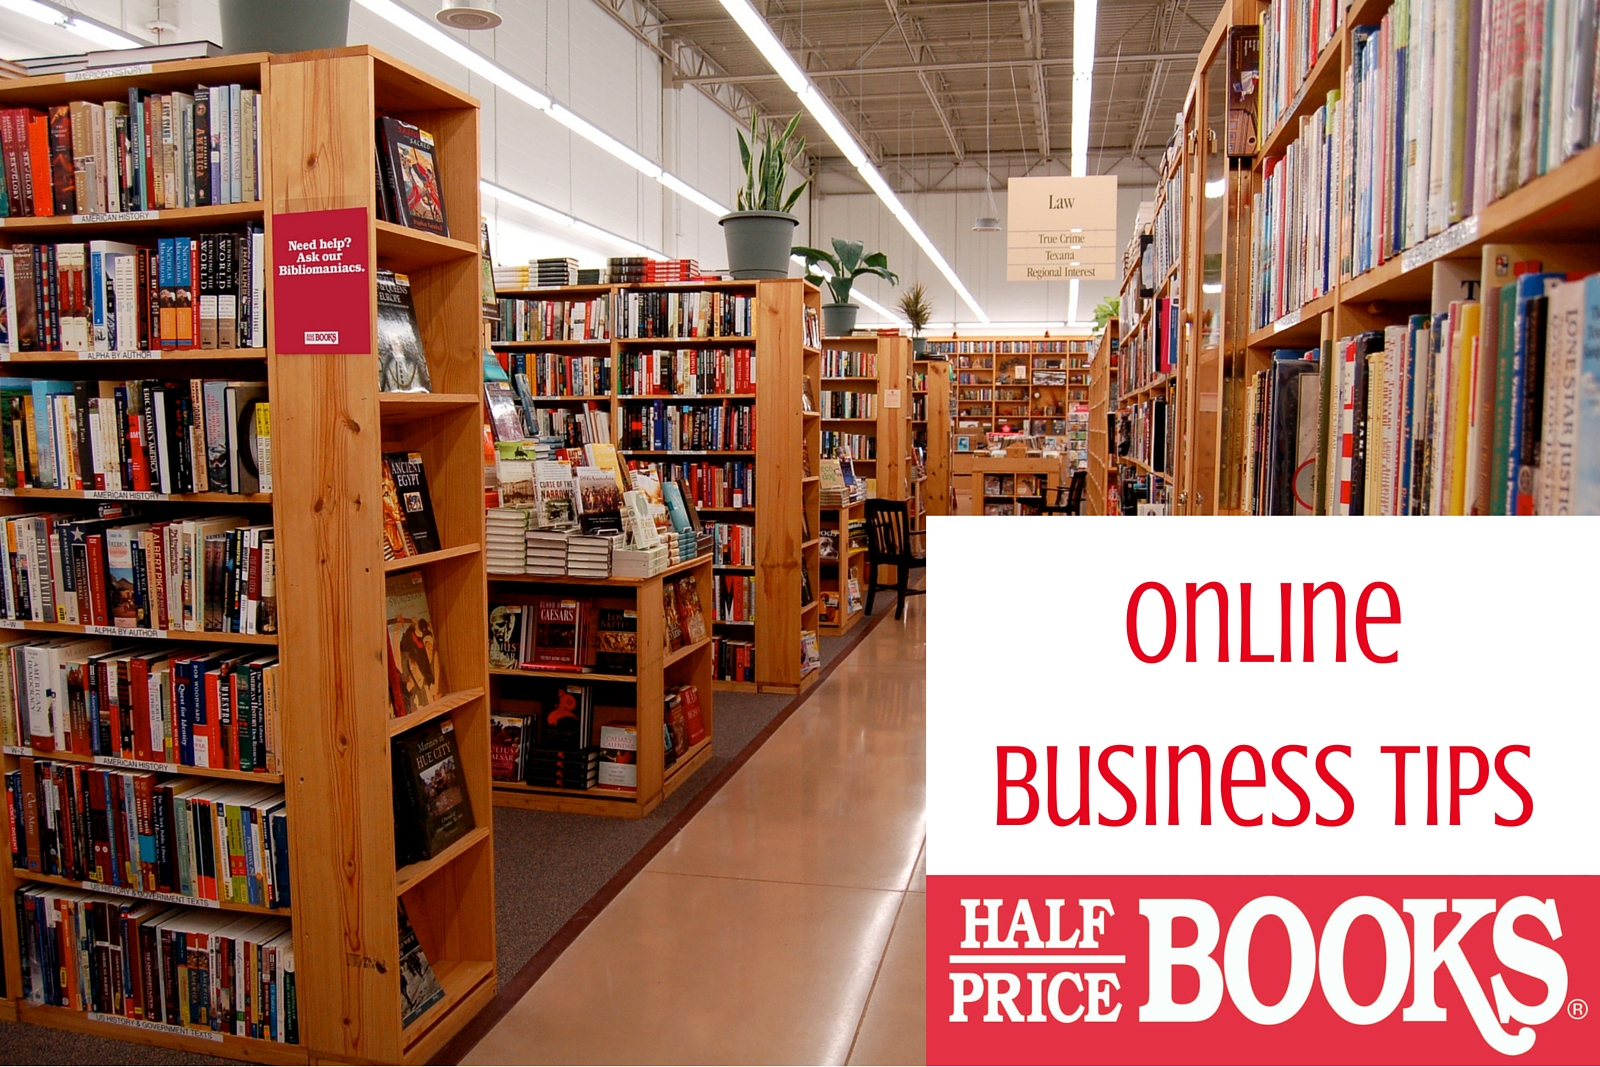 Half Price Books A Tale of a Successful Small Online Business Online